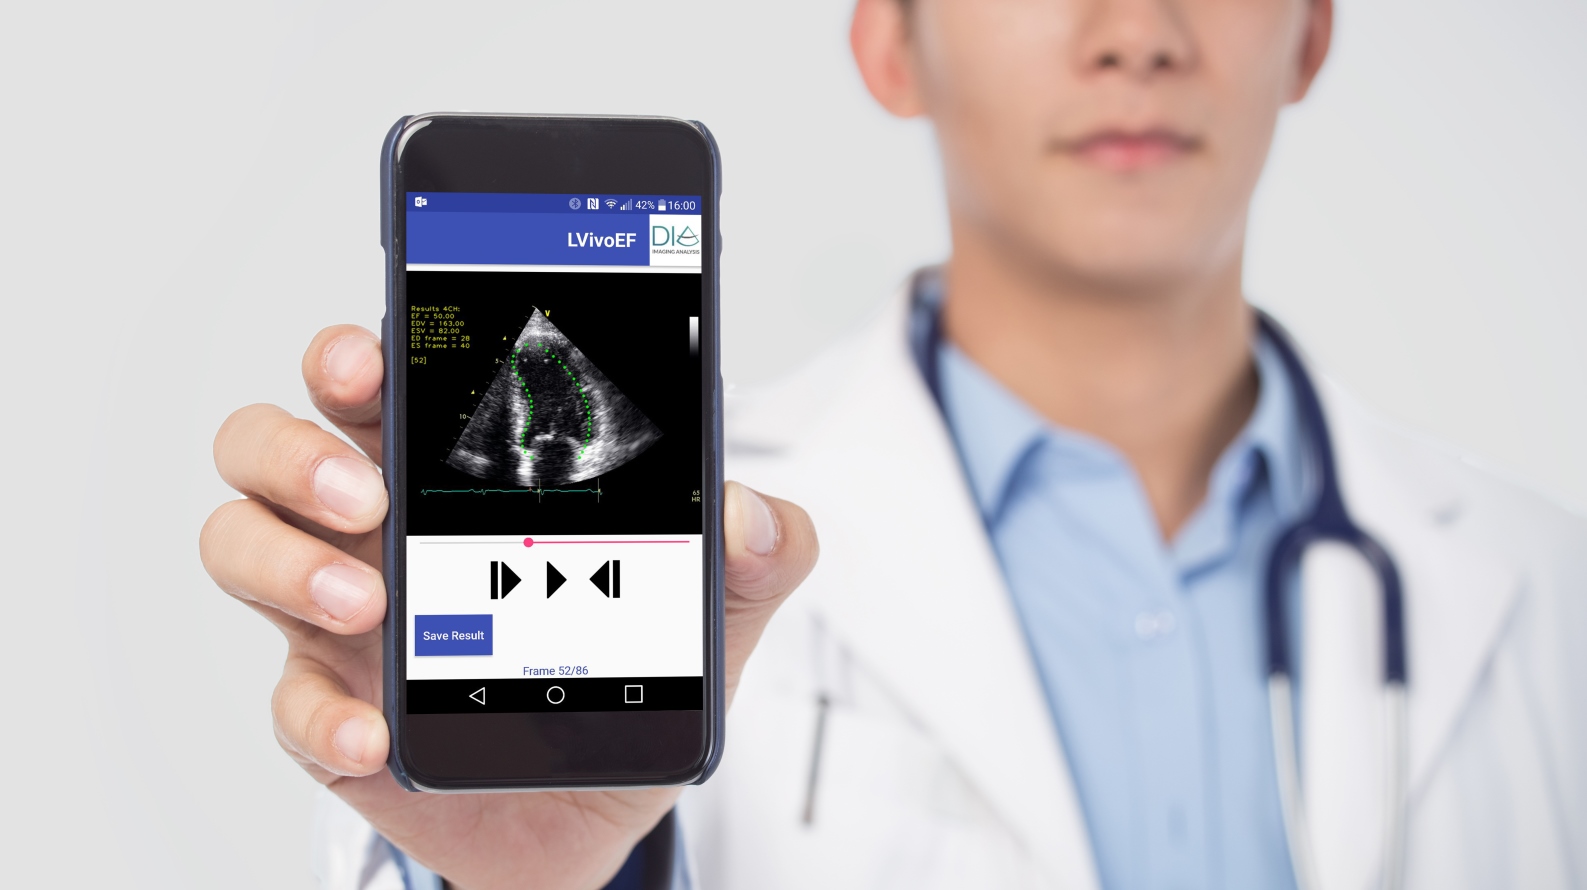 DiA’s automated tools for ultrasound analysis on mobile devices. Photo: courtesy